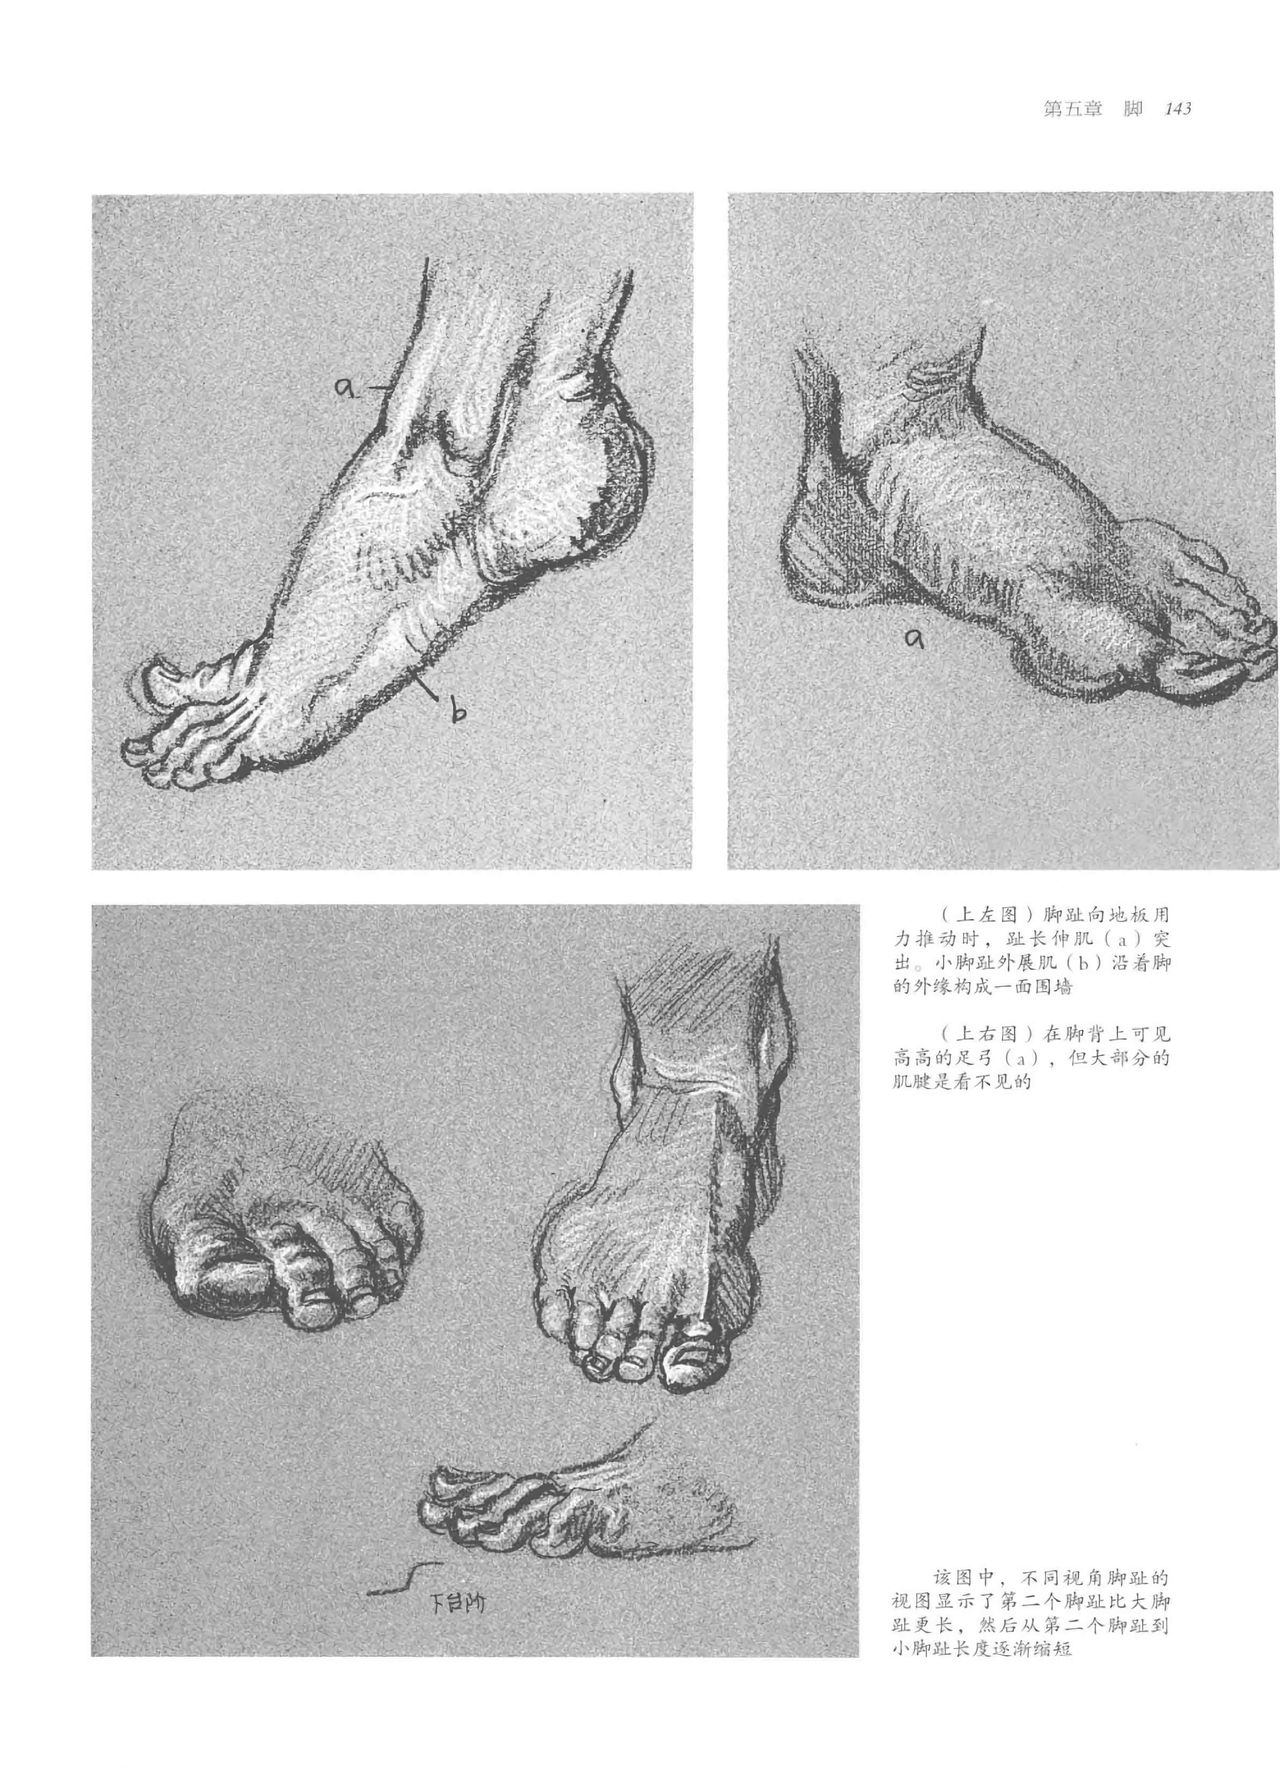 Anatomy-A Complete Guide for Artists - Joseph Sheppard [Chinese] 143